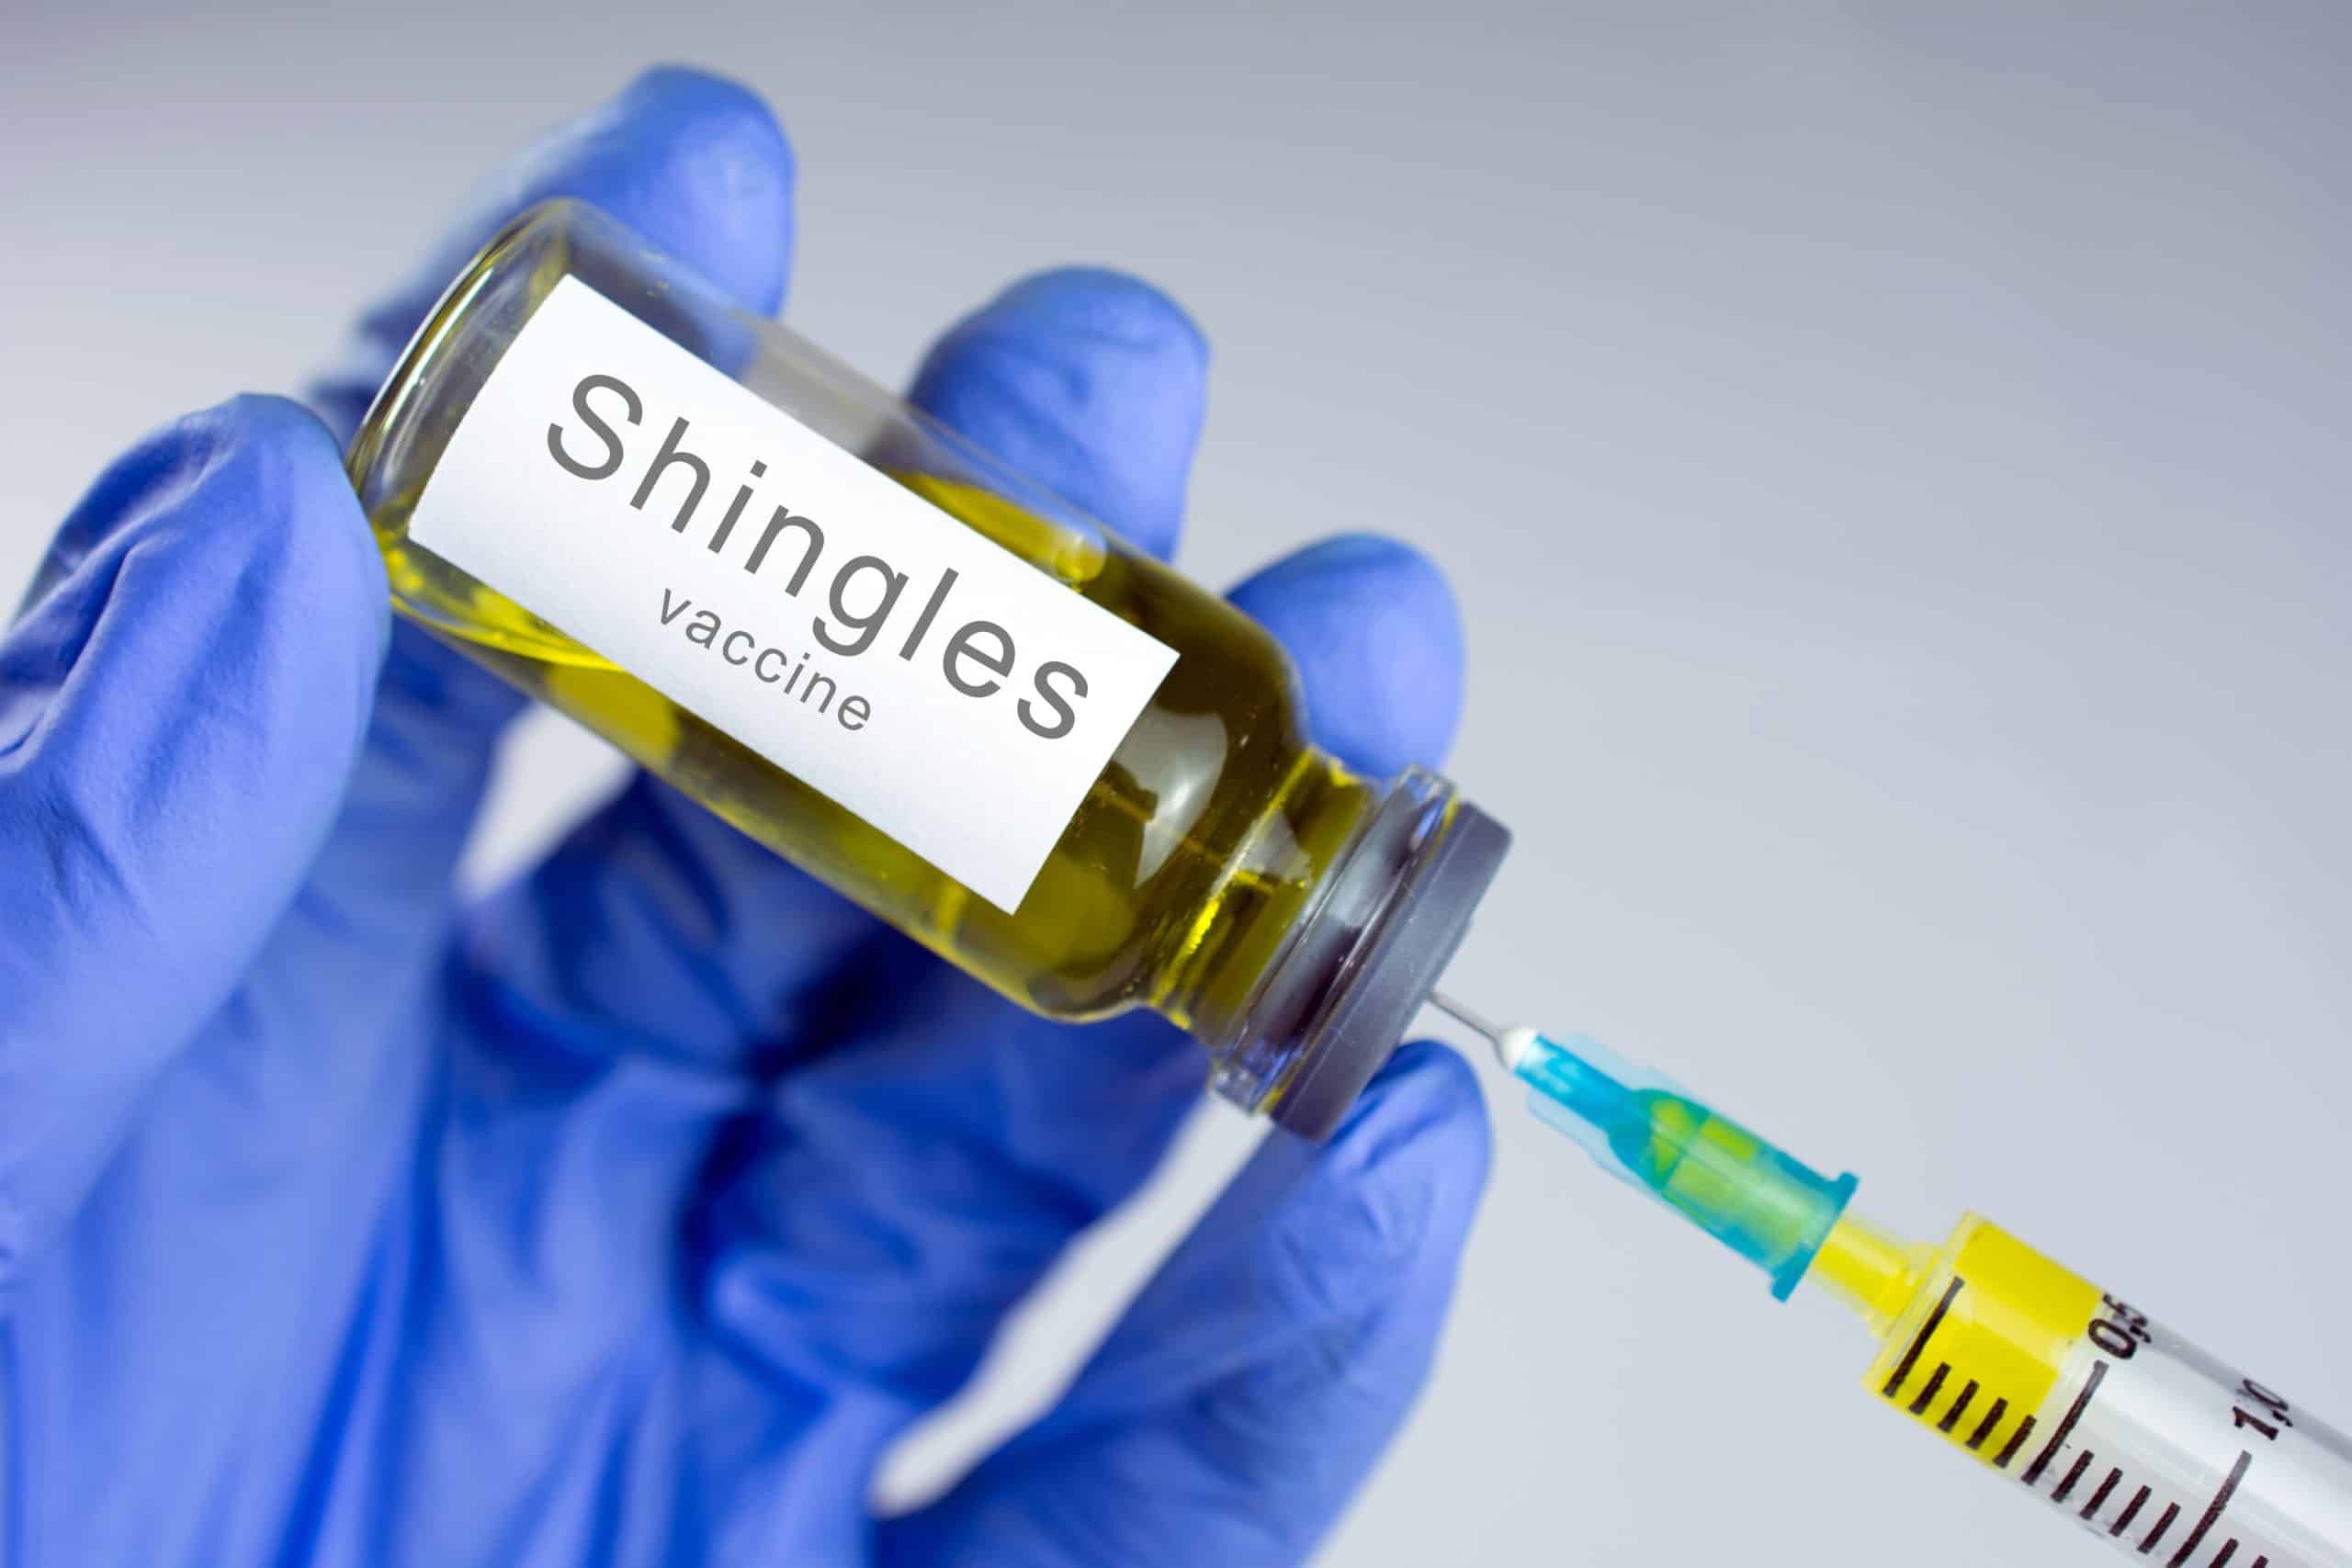 Side Effects of Shingle Vaccines